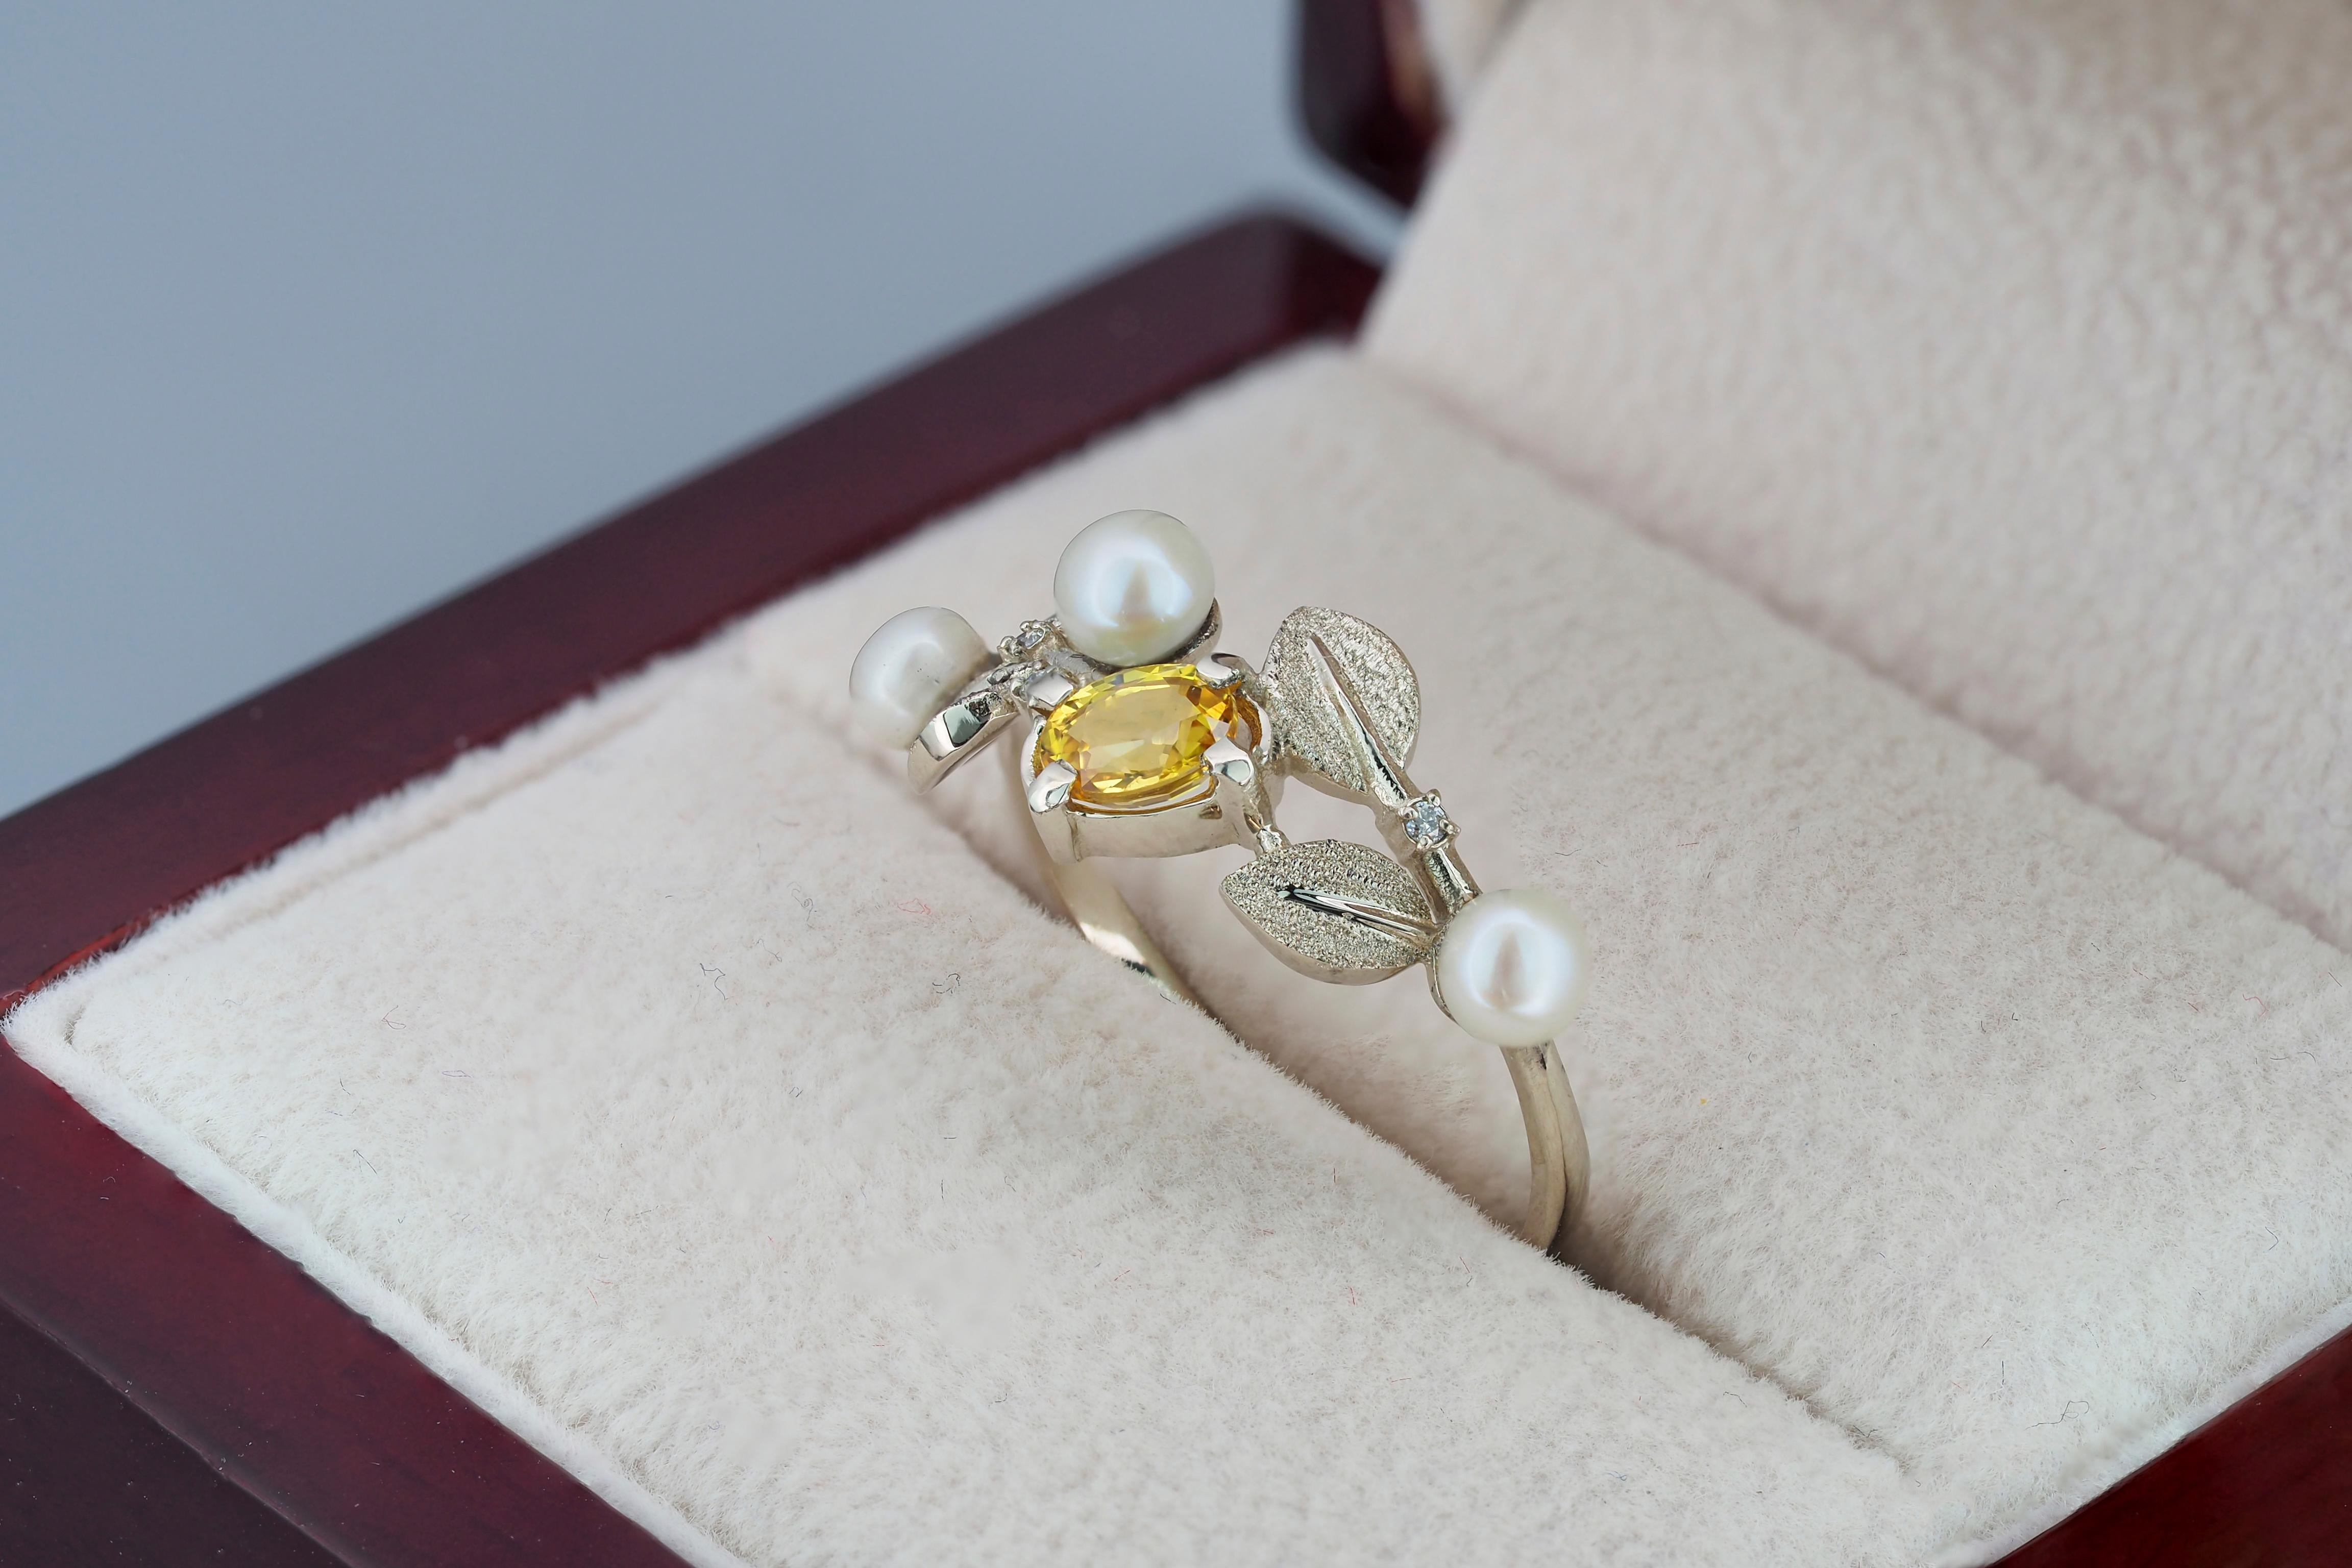 14k Gold Floral Ring with Sapphire, Diamonds and Pearls For Sale 1